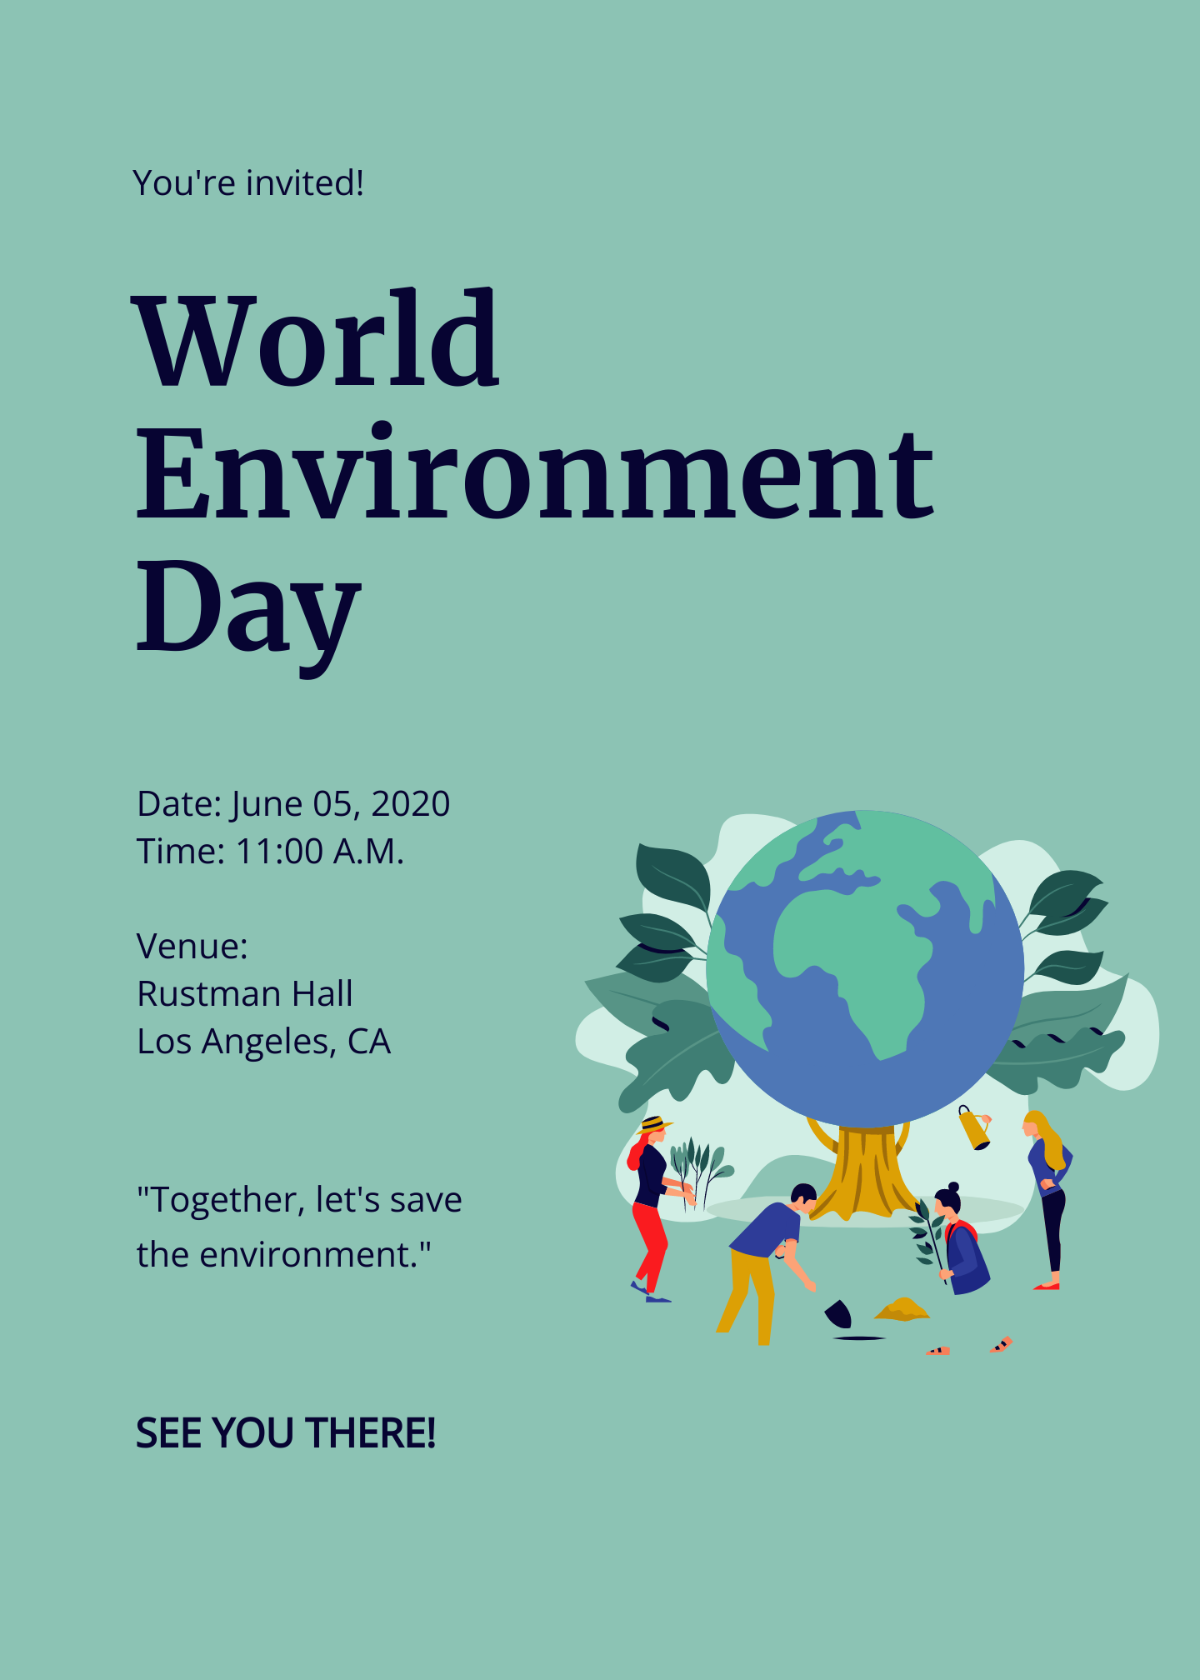 World Environment Day Invitation Card Template